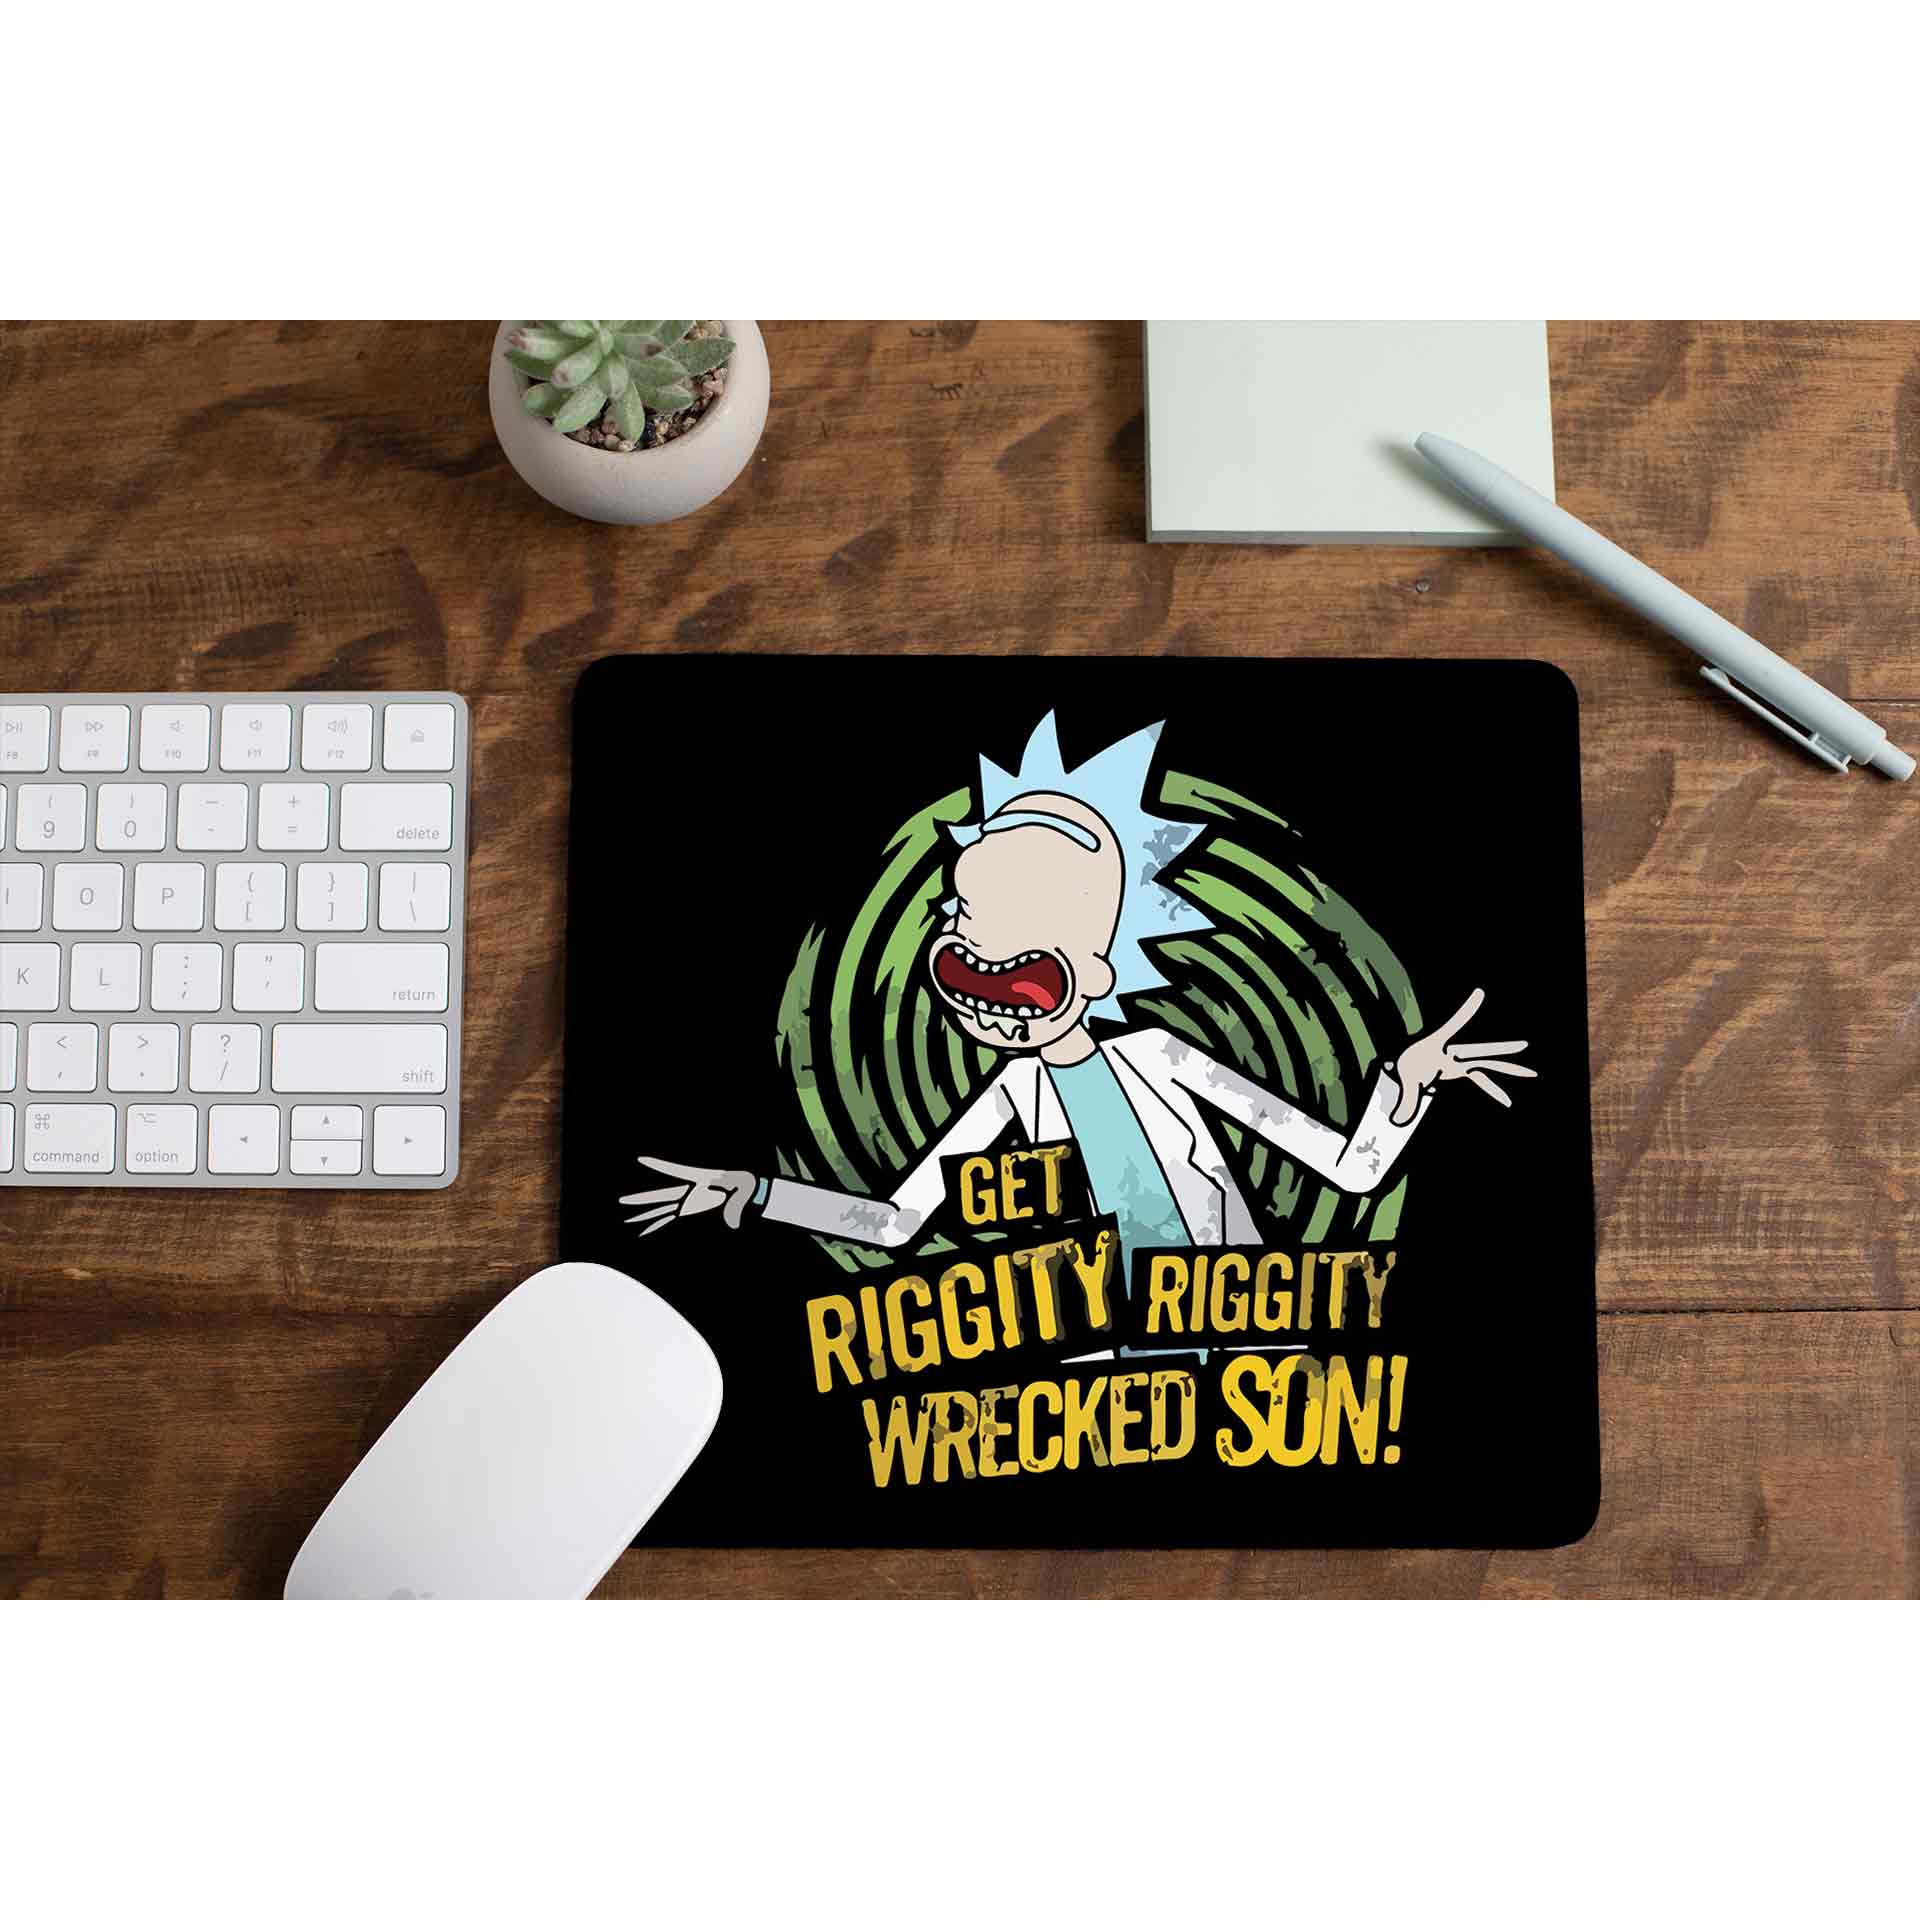 rick and morty riggity mousepad logitech large anime buy online india the banyan tee tbt men women girls boys unisex  rick and morty online summer beth mr meeseeks jerry quote vector art clothing accessories merchandise